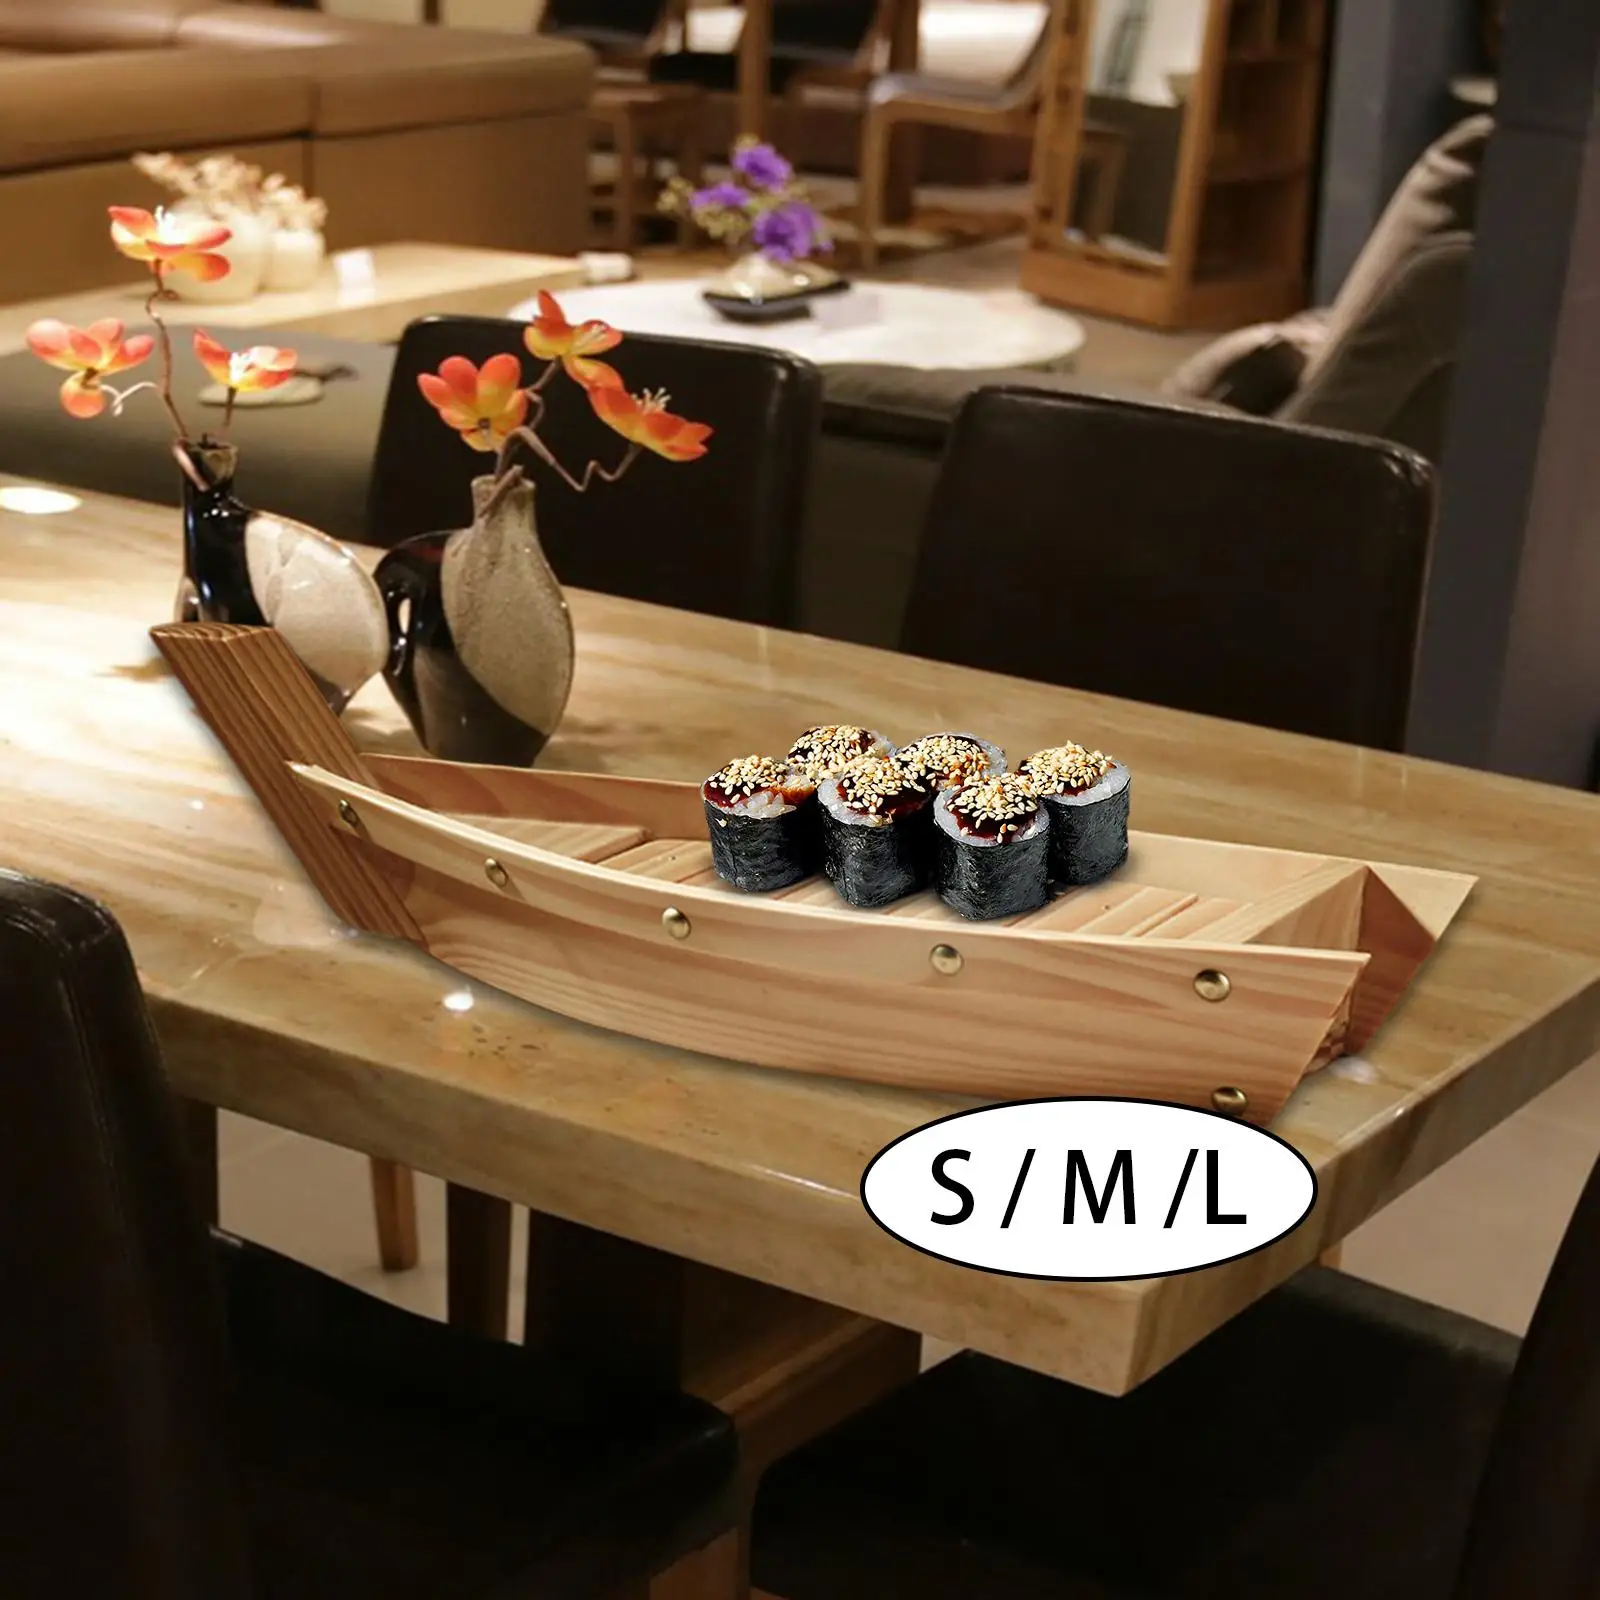 Wooden Sushi Boat Plate Fruit Snacks Tray, Tableware Decoration Kitchen Accessories Serving Boat Plate, for Bar, Home Appetizers